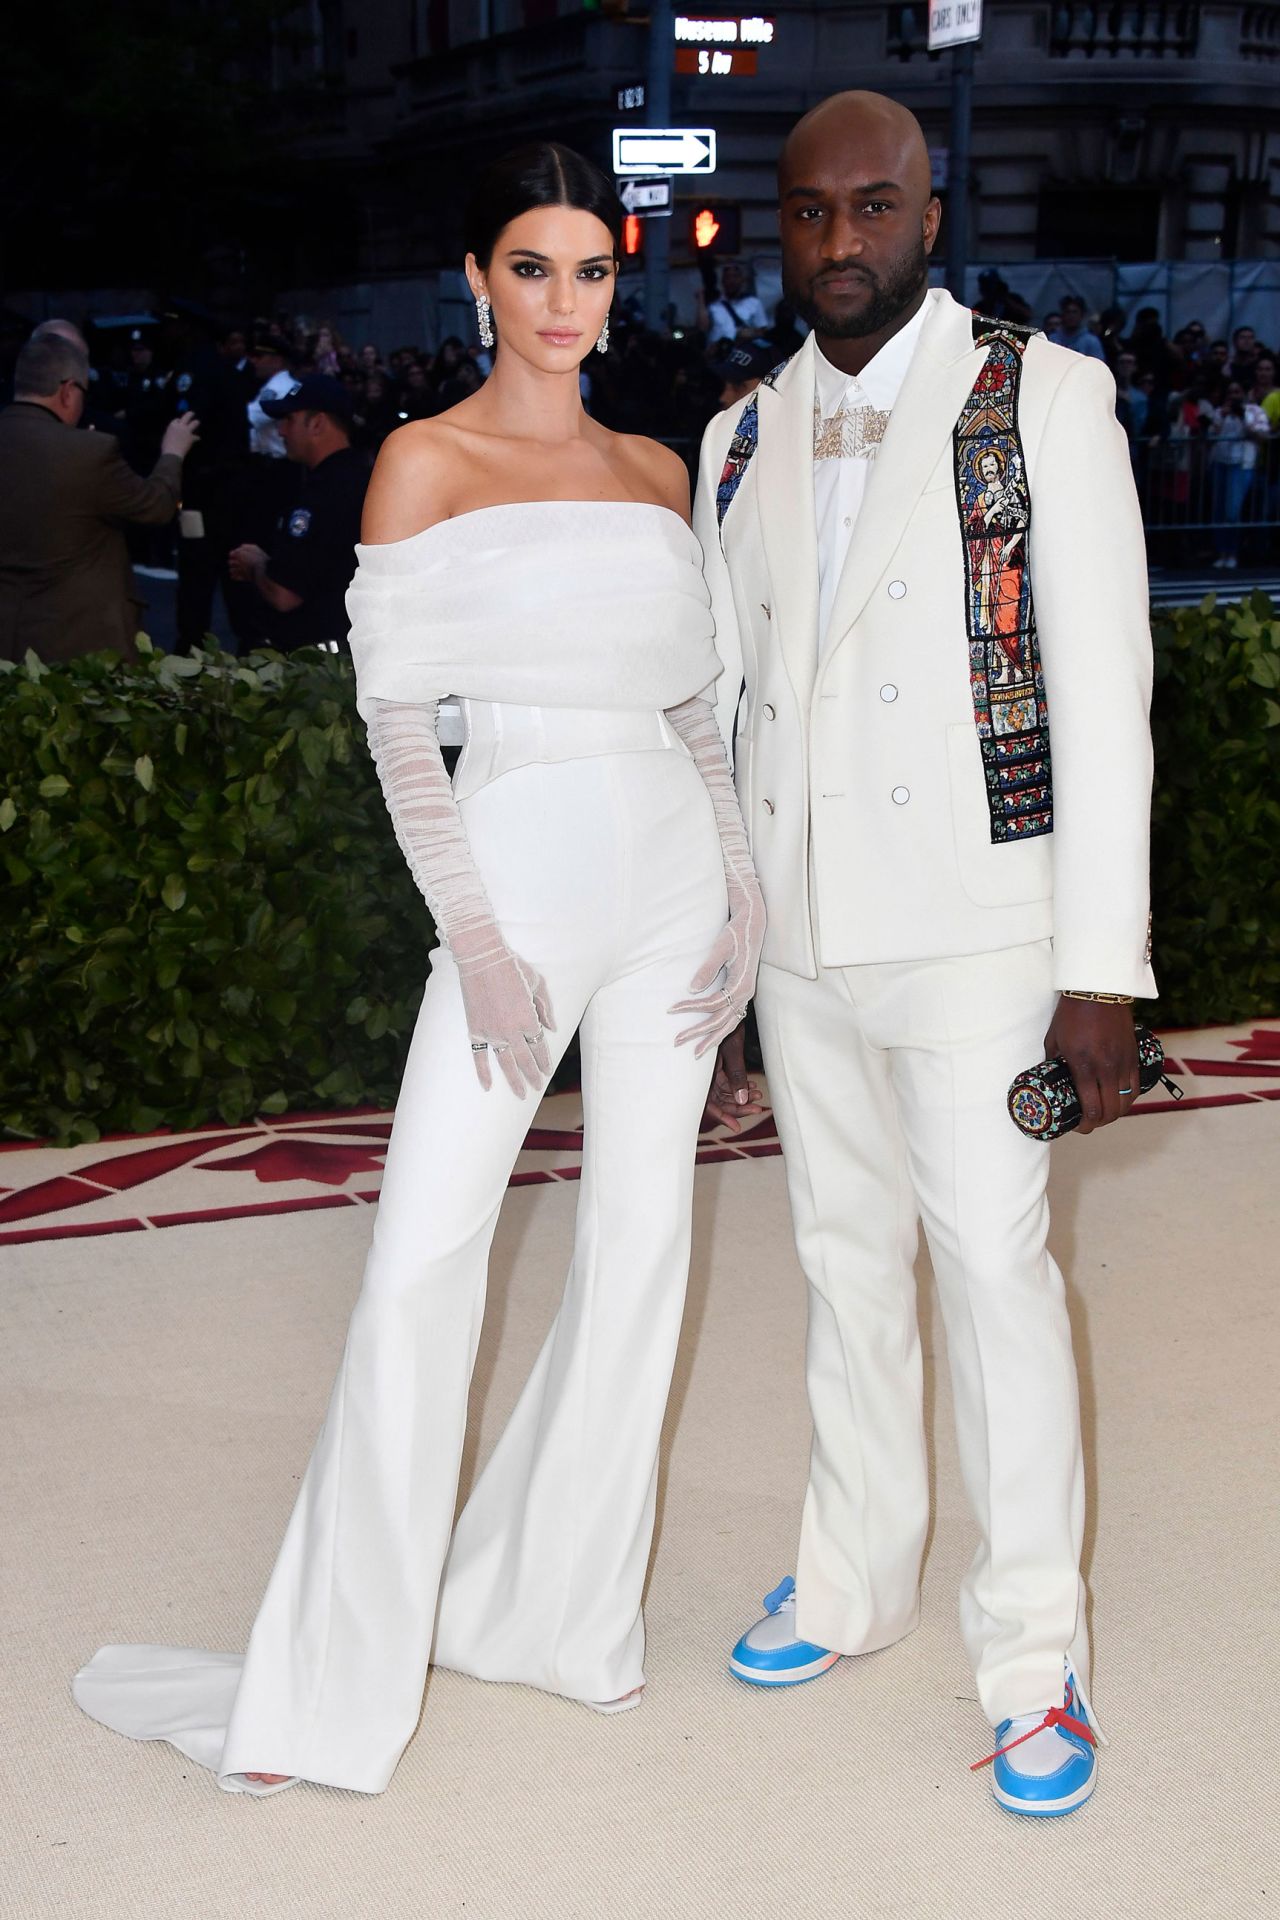 At the 2018 Met Gala, Abloh dressed and accompanied model Kendall Jenner in a trailing jumpsuit by his brand Off-White. The year's theme was "Heavenly Bodies: Fashion & The Catholic Imagination"' and Abloh's white suit featured religious panels designed to look like cathedral stained-glass windows, alongside a pair of blue and white sneakers.